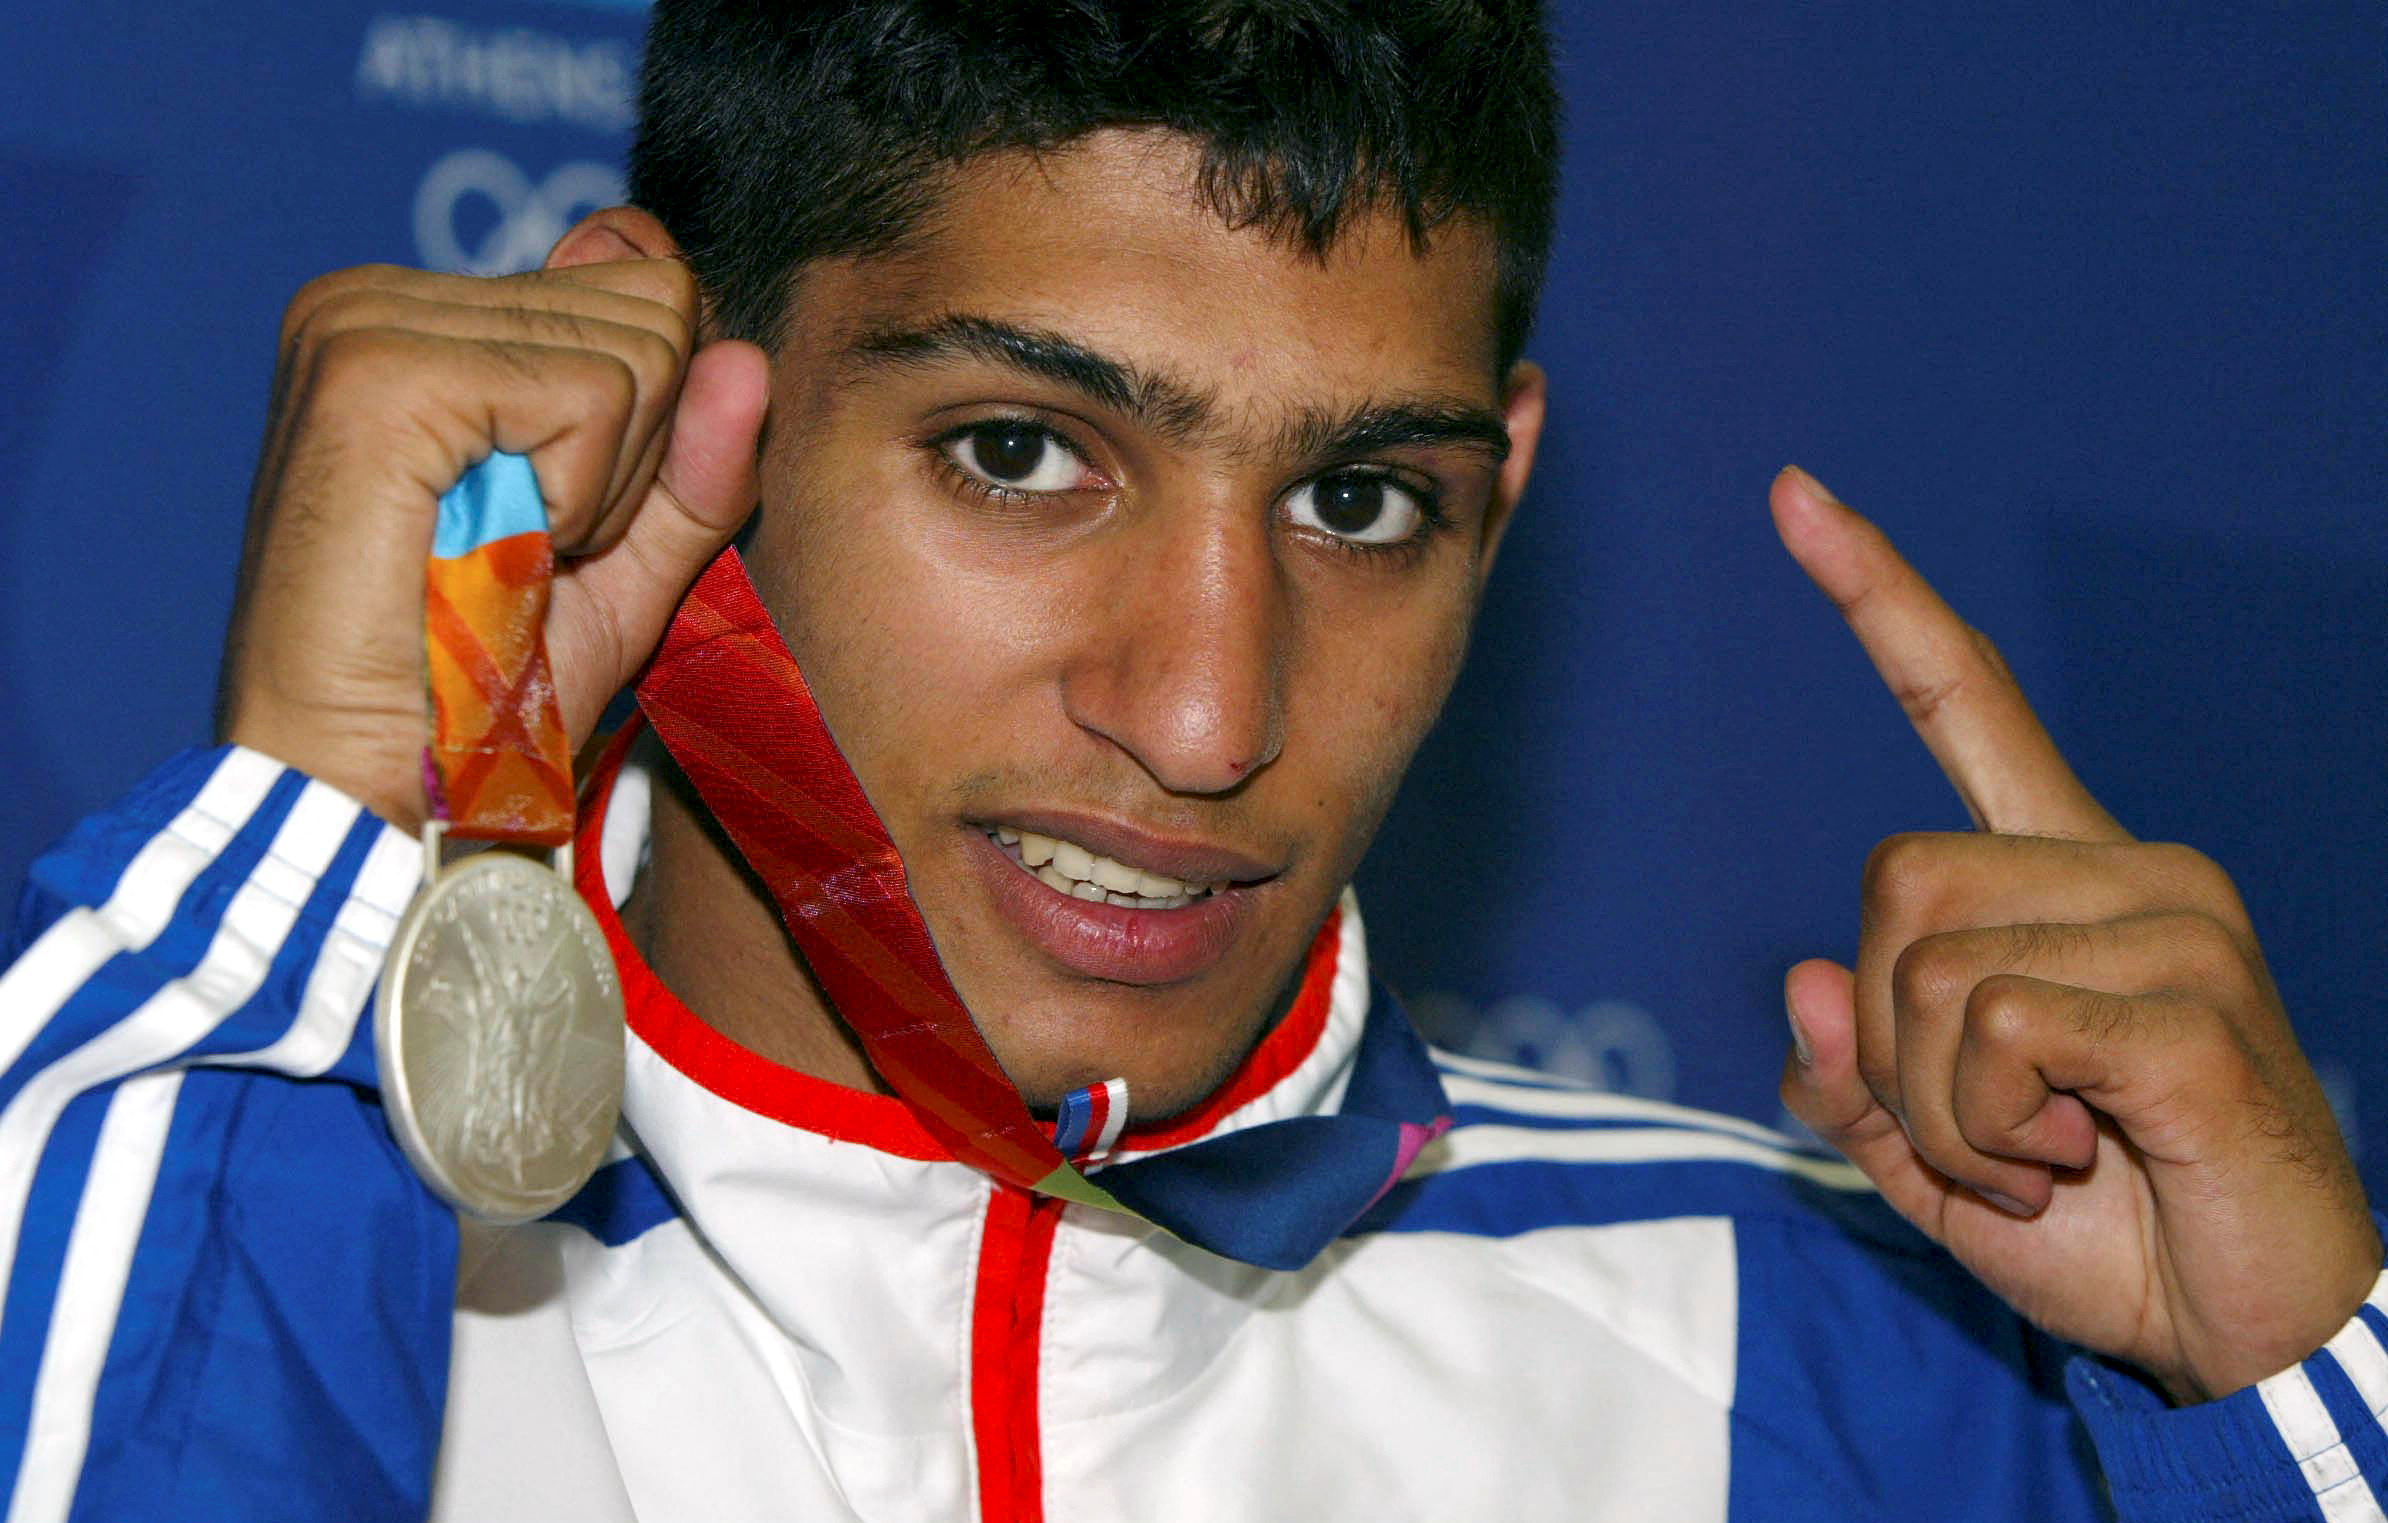 Amir Khan announces his retirement from boxing